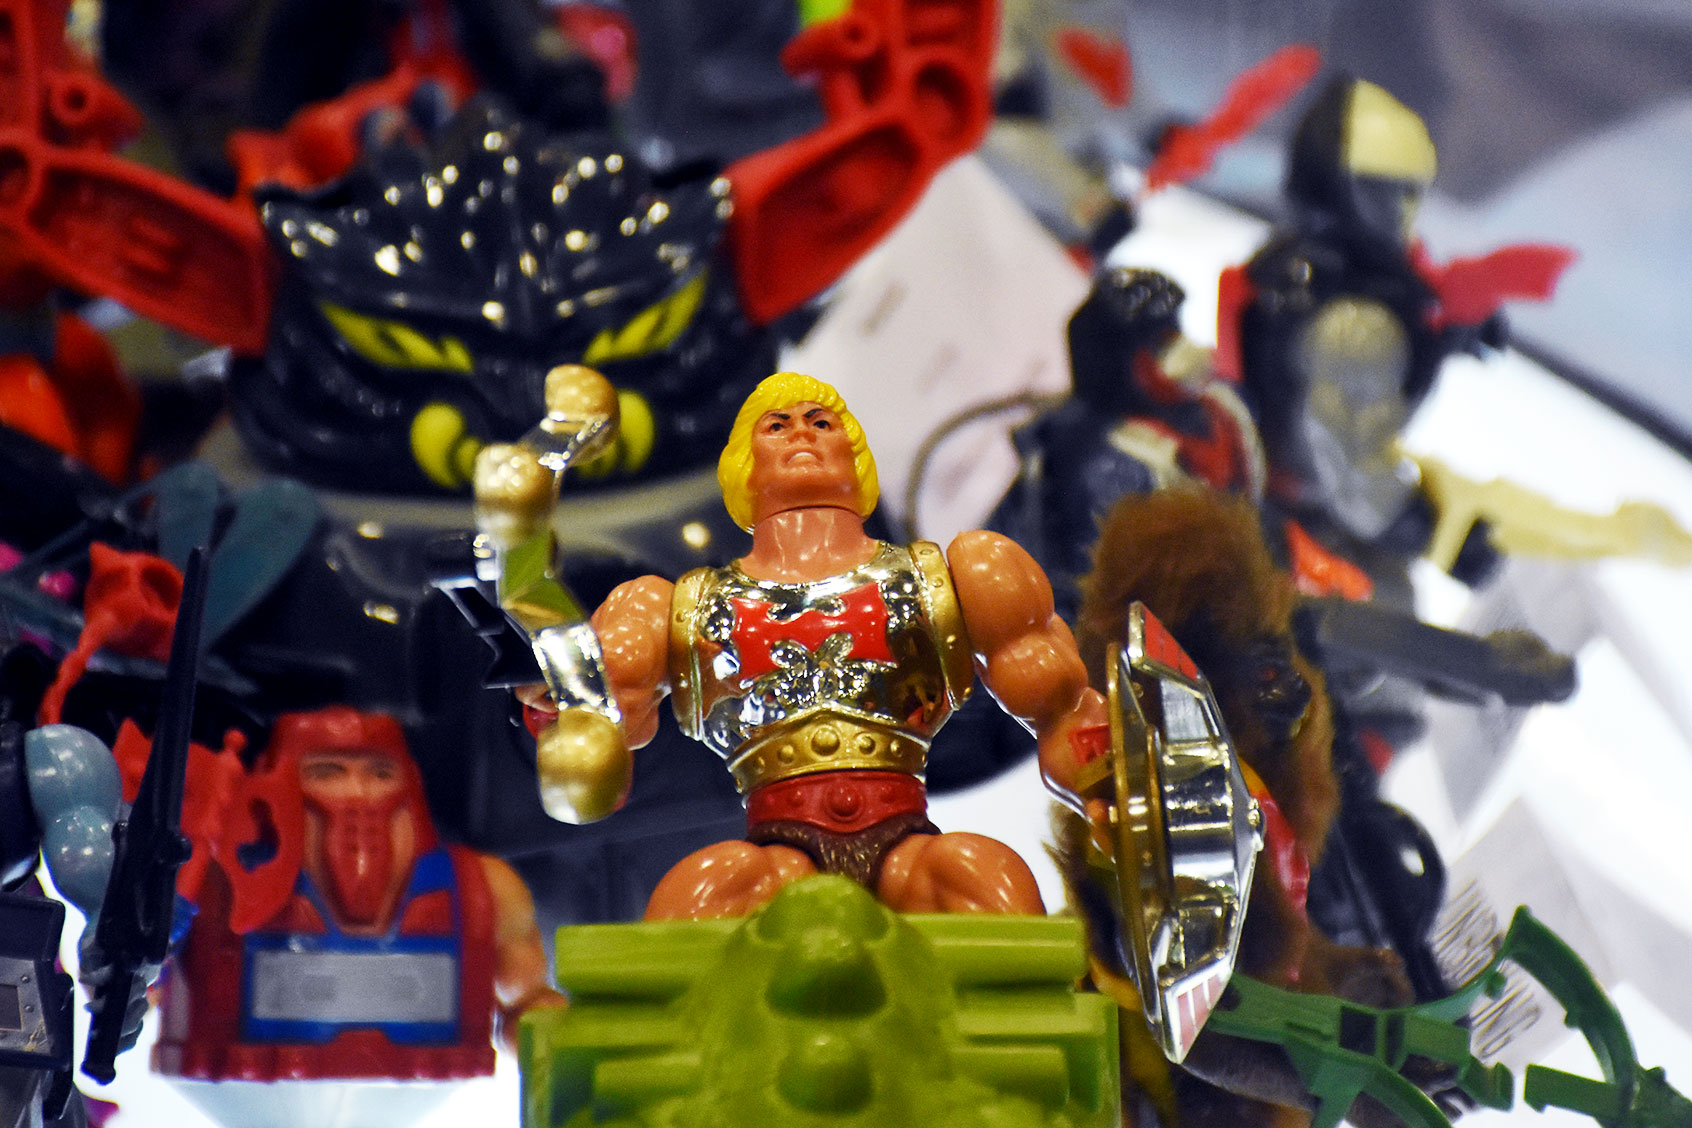 He-Man: Strongest Gen X unifier within the universe